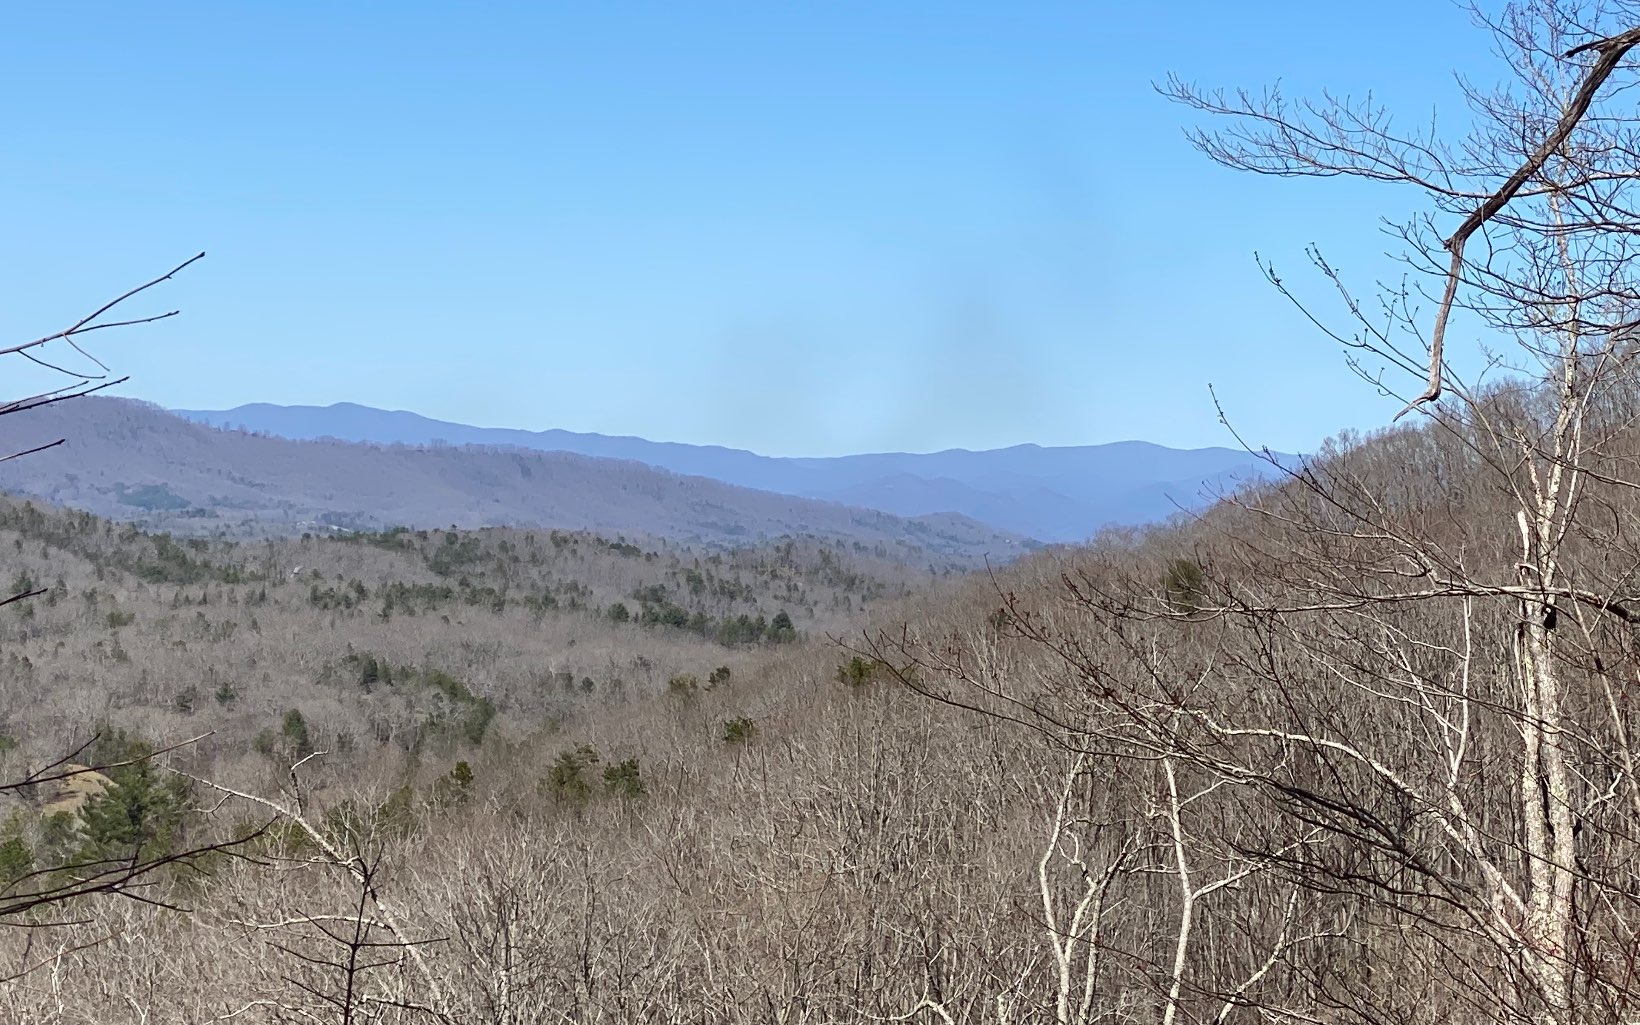 Spectacular year round views from this 3.71 acre lot! Welcome to Raven Ridge. This mountain community is nestled in the heart of the Appalachian Mountains w/ easy access to Blue Ridge, Blairsville and Murphy. Upscale cabins already built in this growing development. Underground utilities & community water available.